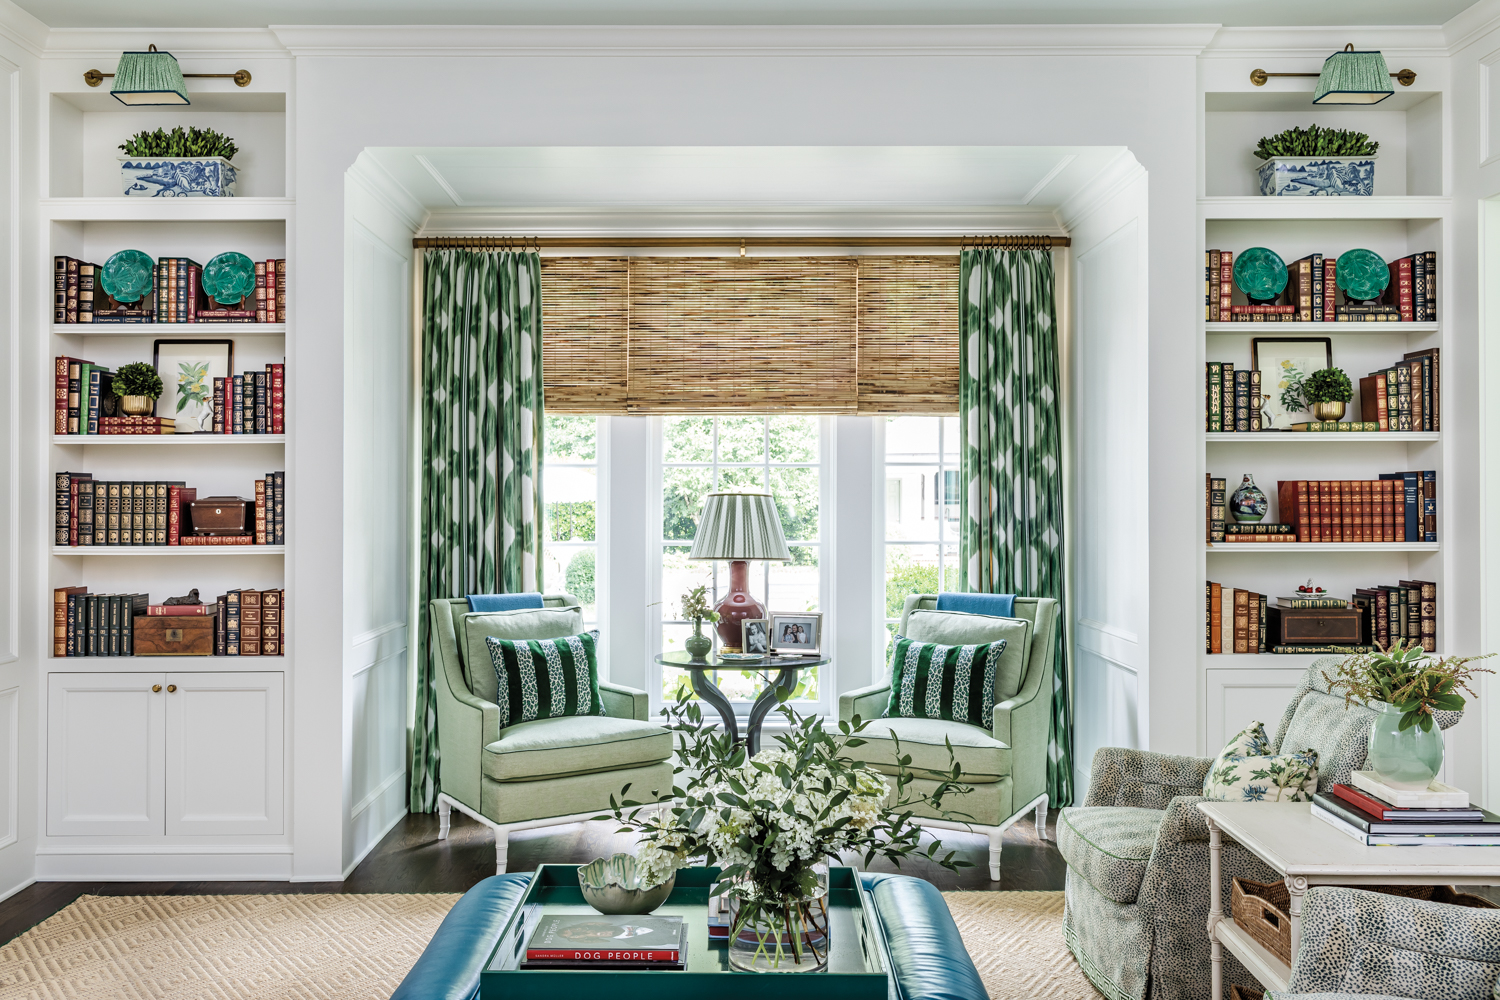 Keeping room with built-in bookshelves, patterned draperies, a pair of armchairs and a leather ottoman